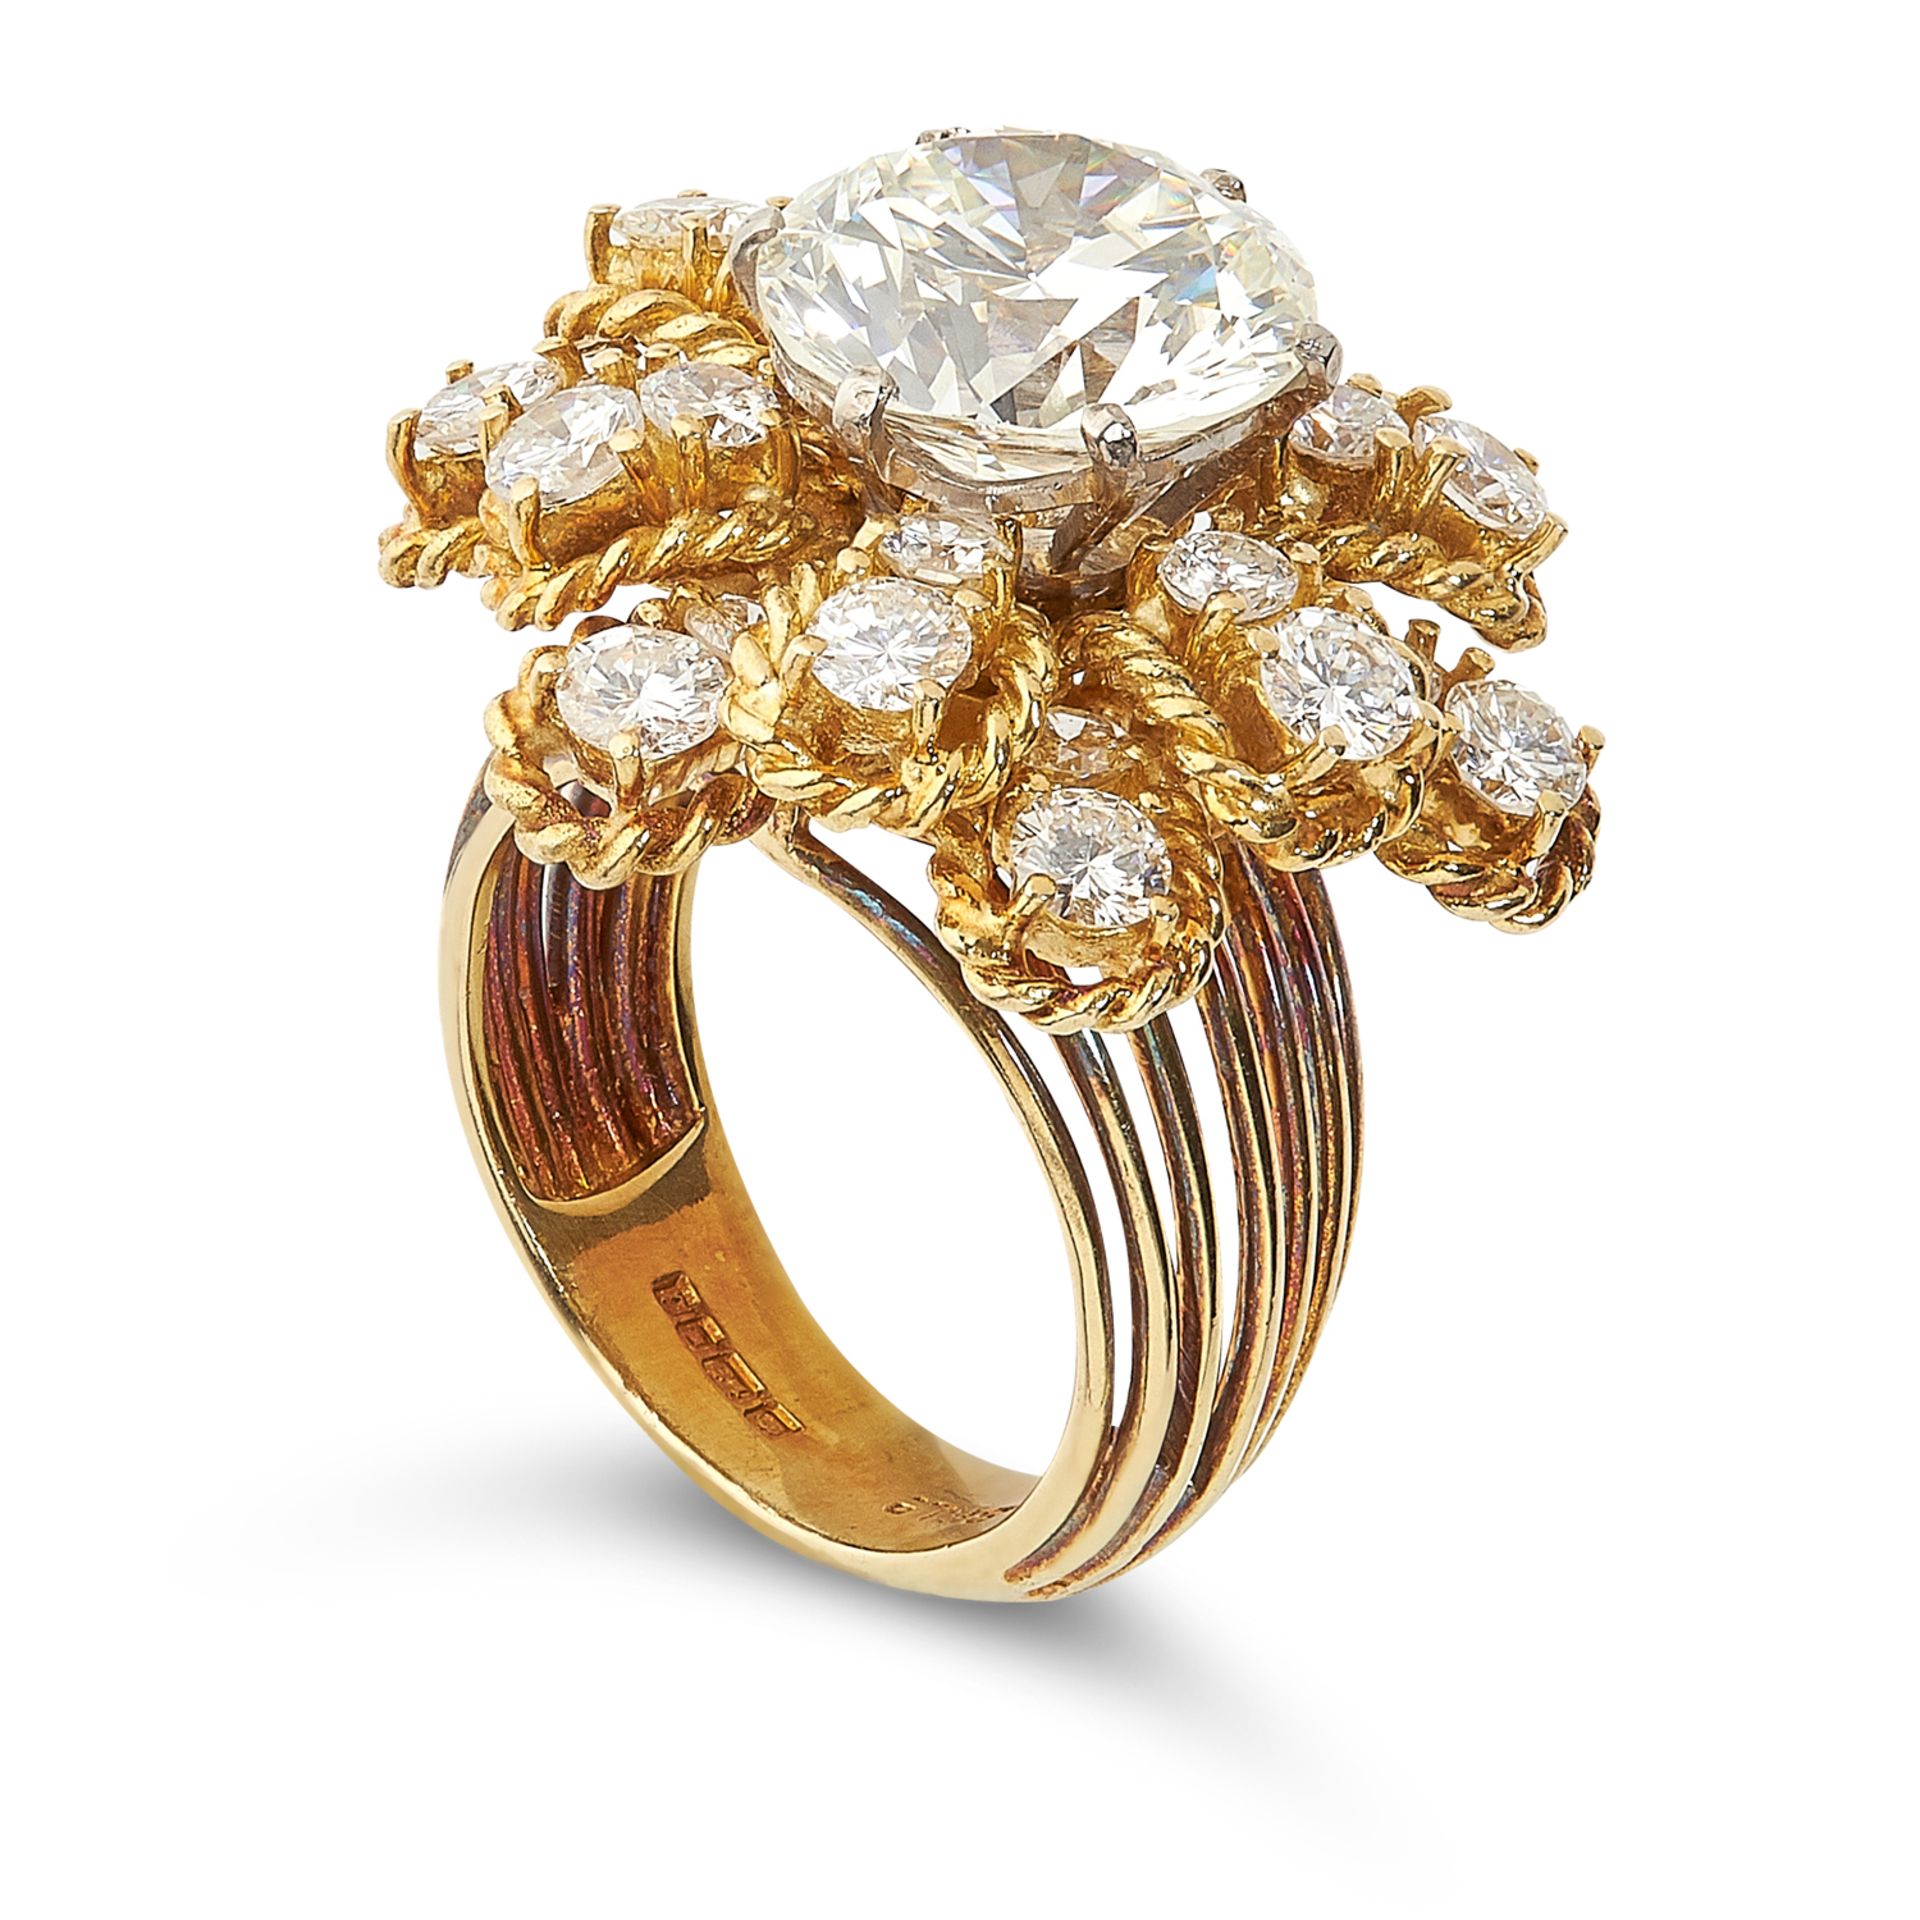 A VINTAGE 4.76 CARAT DIAMOND RING, BEN ROSENFELD 1964 in 18ct yellow gold, set with a central - Bild 3 aus 4